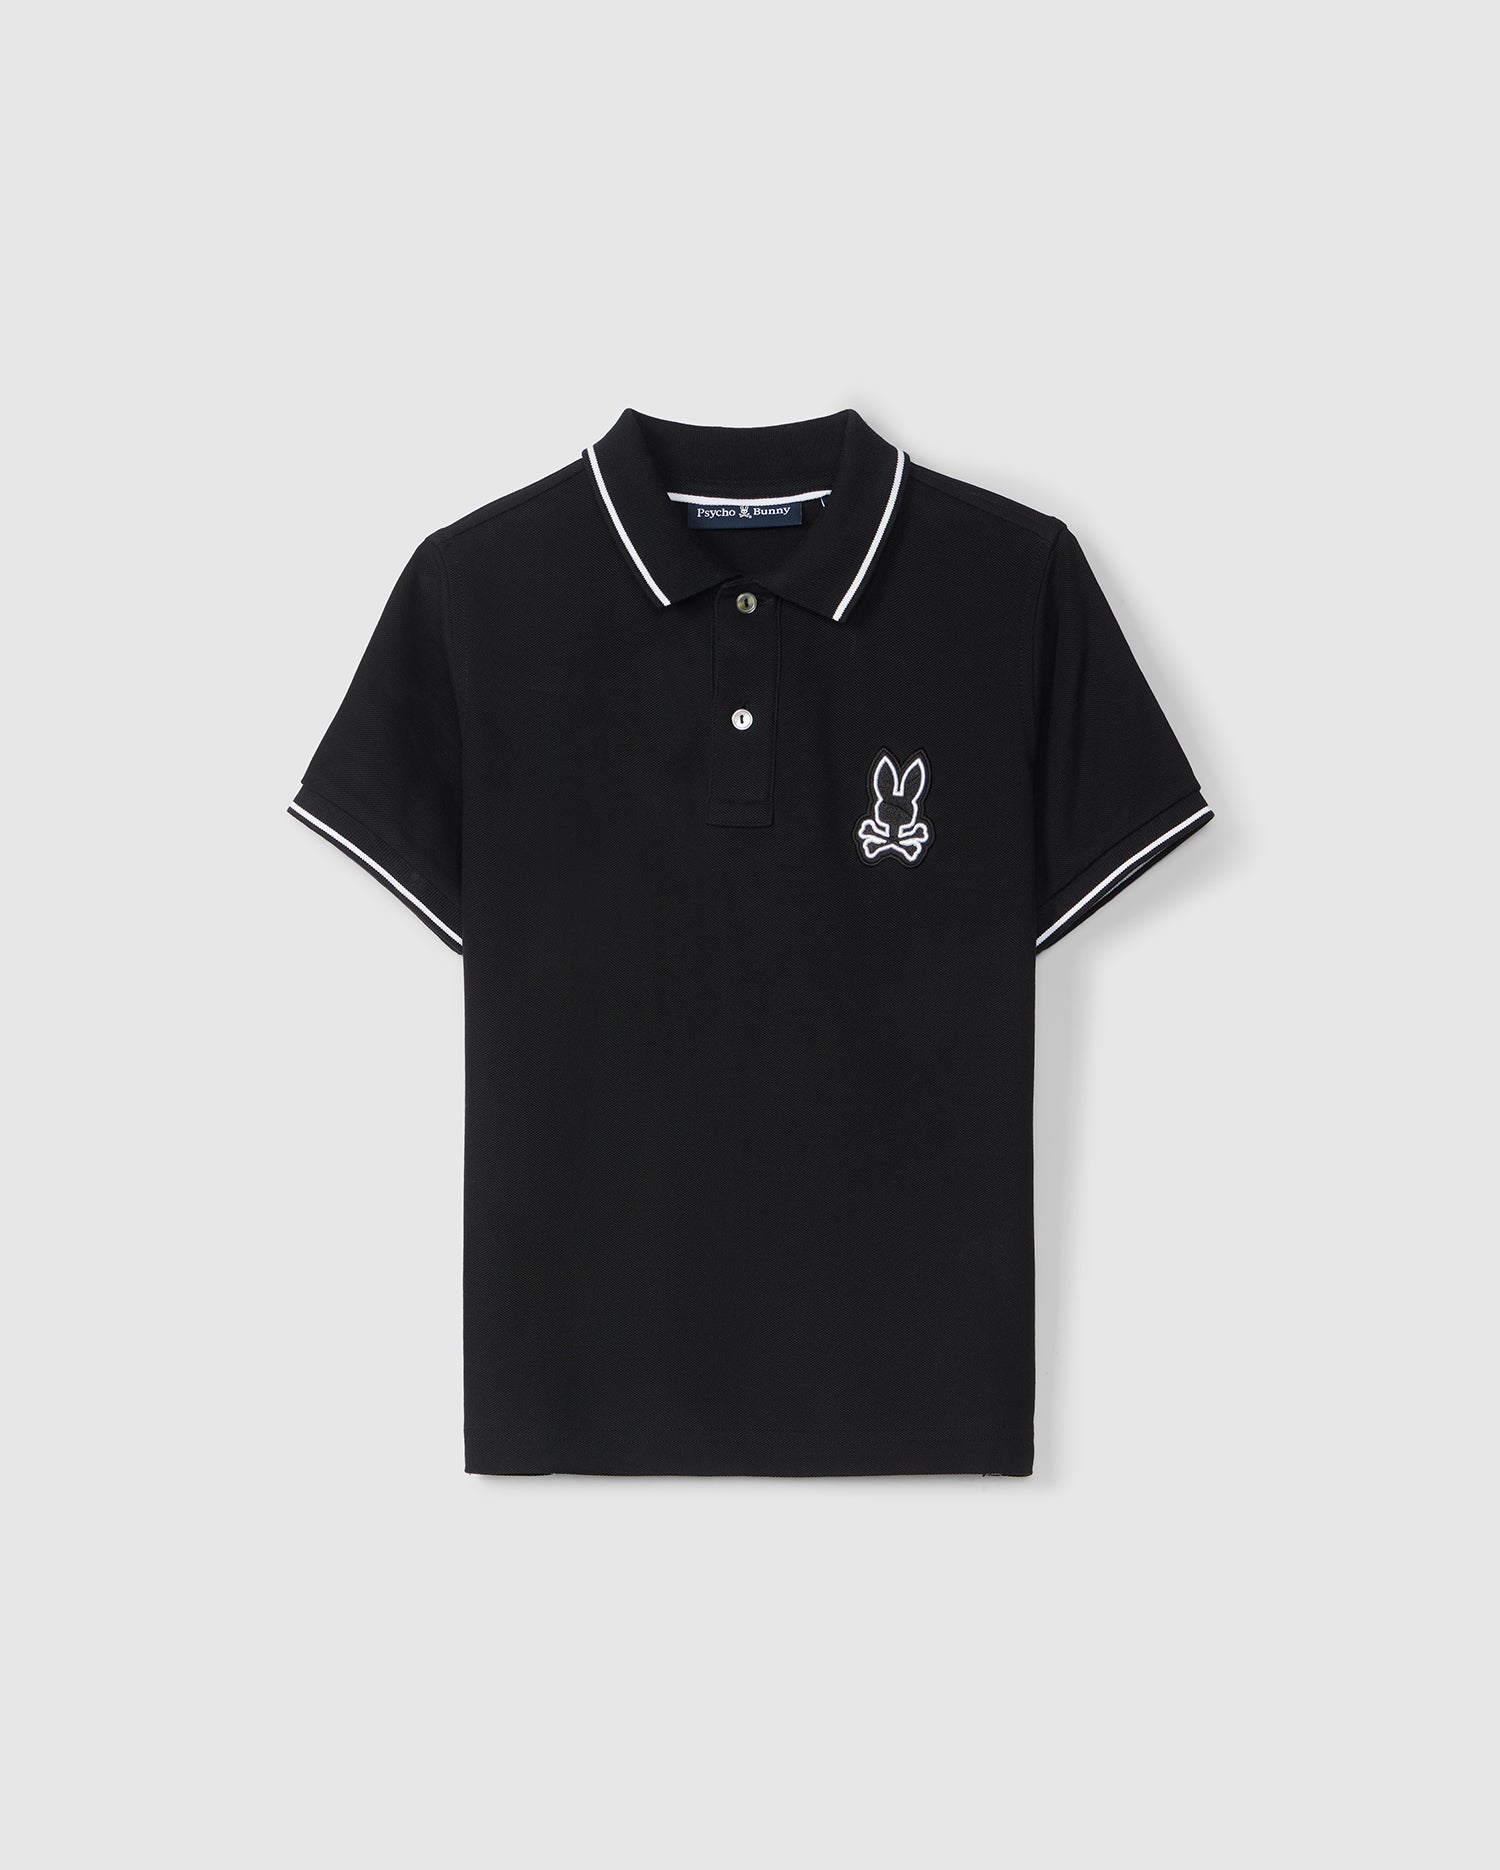 A black short-sleeve KIDS LENOX PIQUE POLO SHIRT - B0K138B200 with white trim on the collar and sleeves. Made from soft Pima cotton, it features a small embroidered bunny with crossed bones near the left chest area by Psycho Bunny.